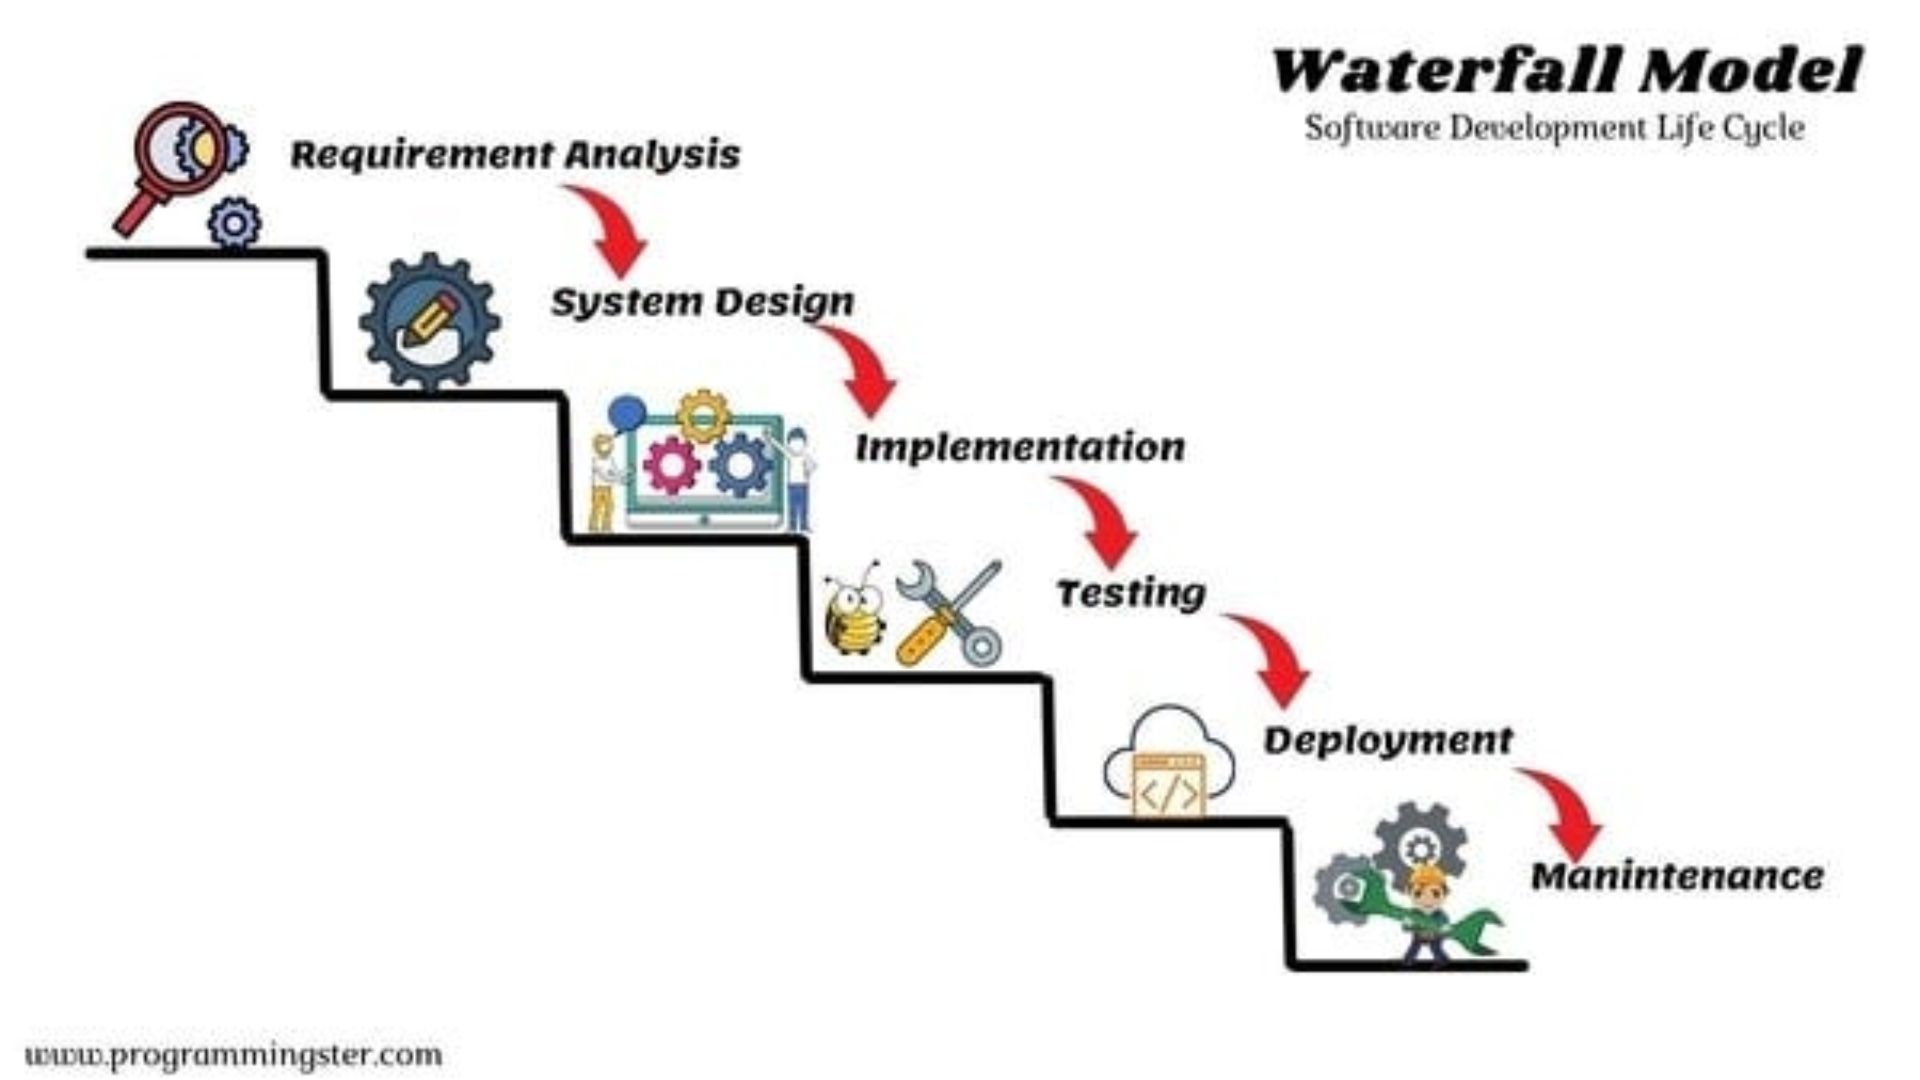 The Waterfall Model Explained